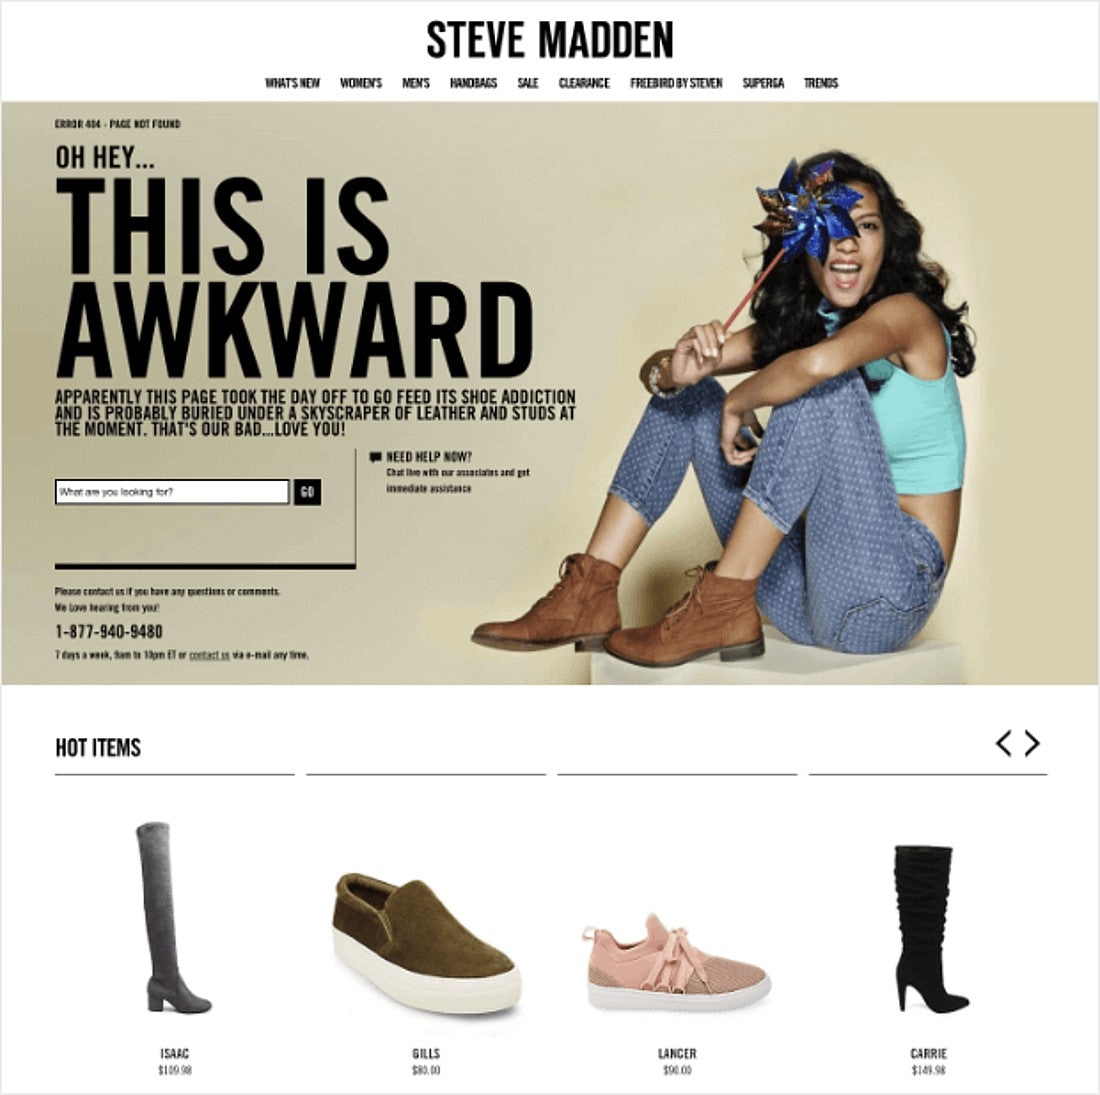 Steven Madden 404 Page Example